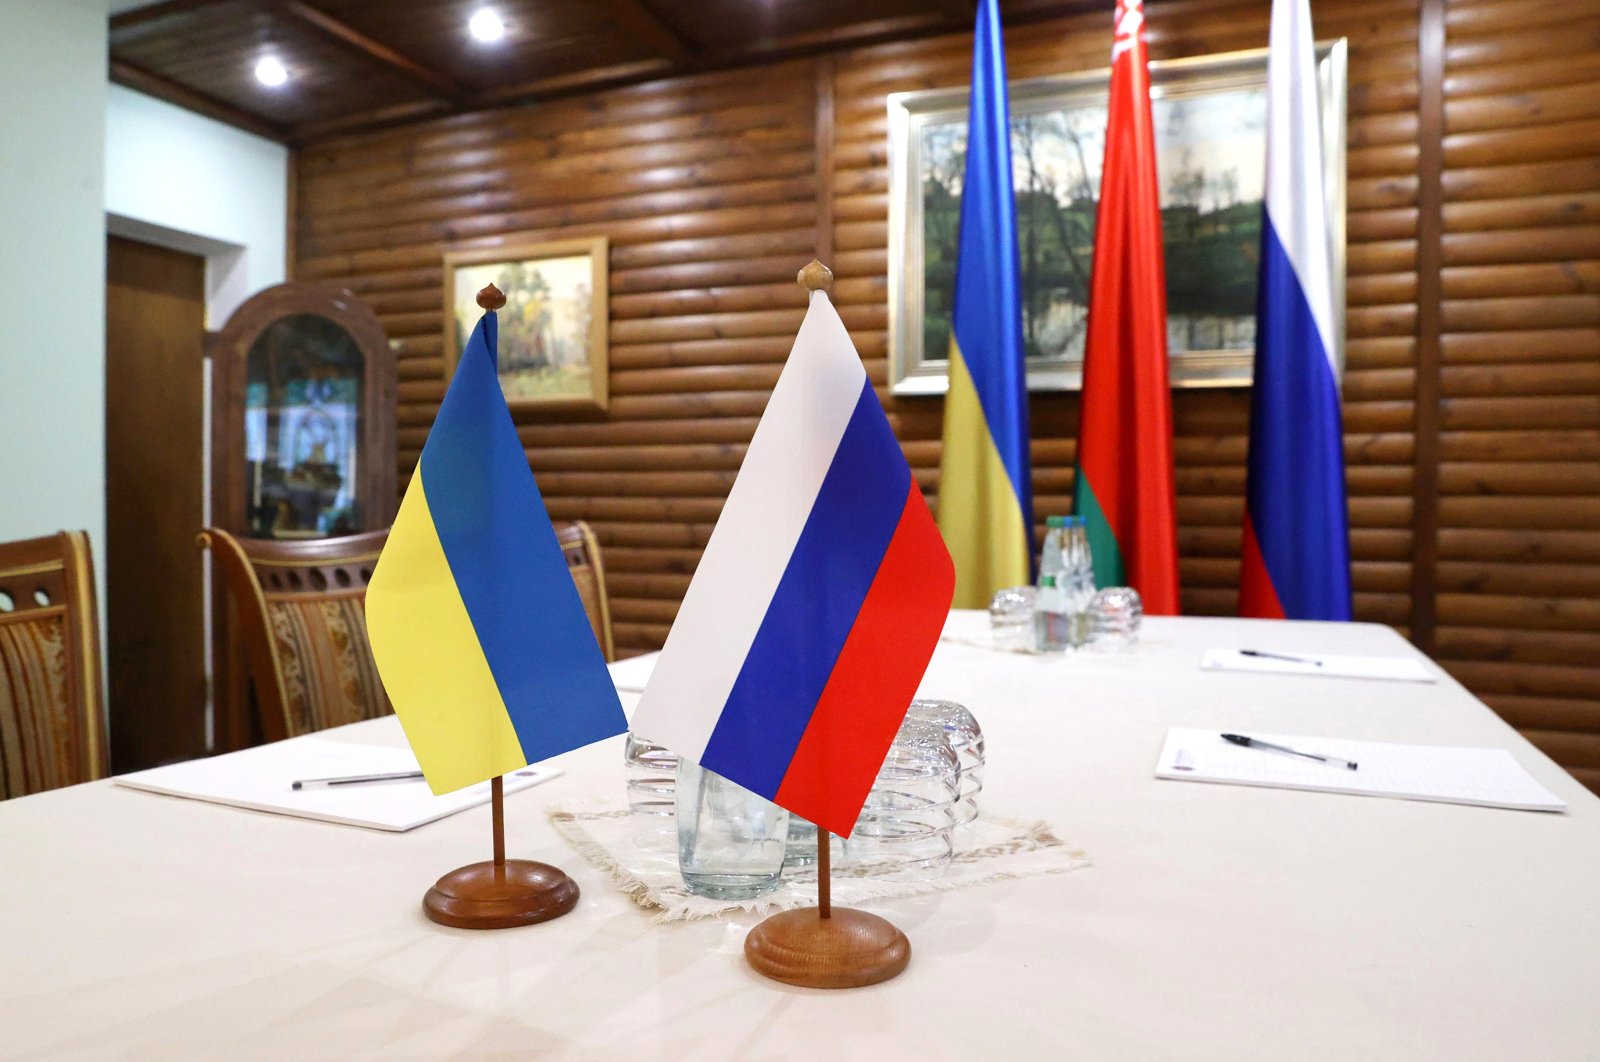 A handout photo made available by BelTA news agency shows a hall ready to host Russia-Ukraine cease-fire negotiations, at an undisclosed location in the Brest region, Belarus, March 7, 2022. (EPA via BelTa Handout)